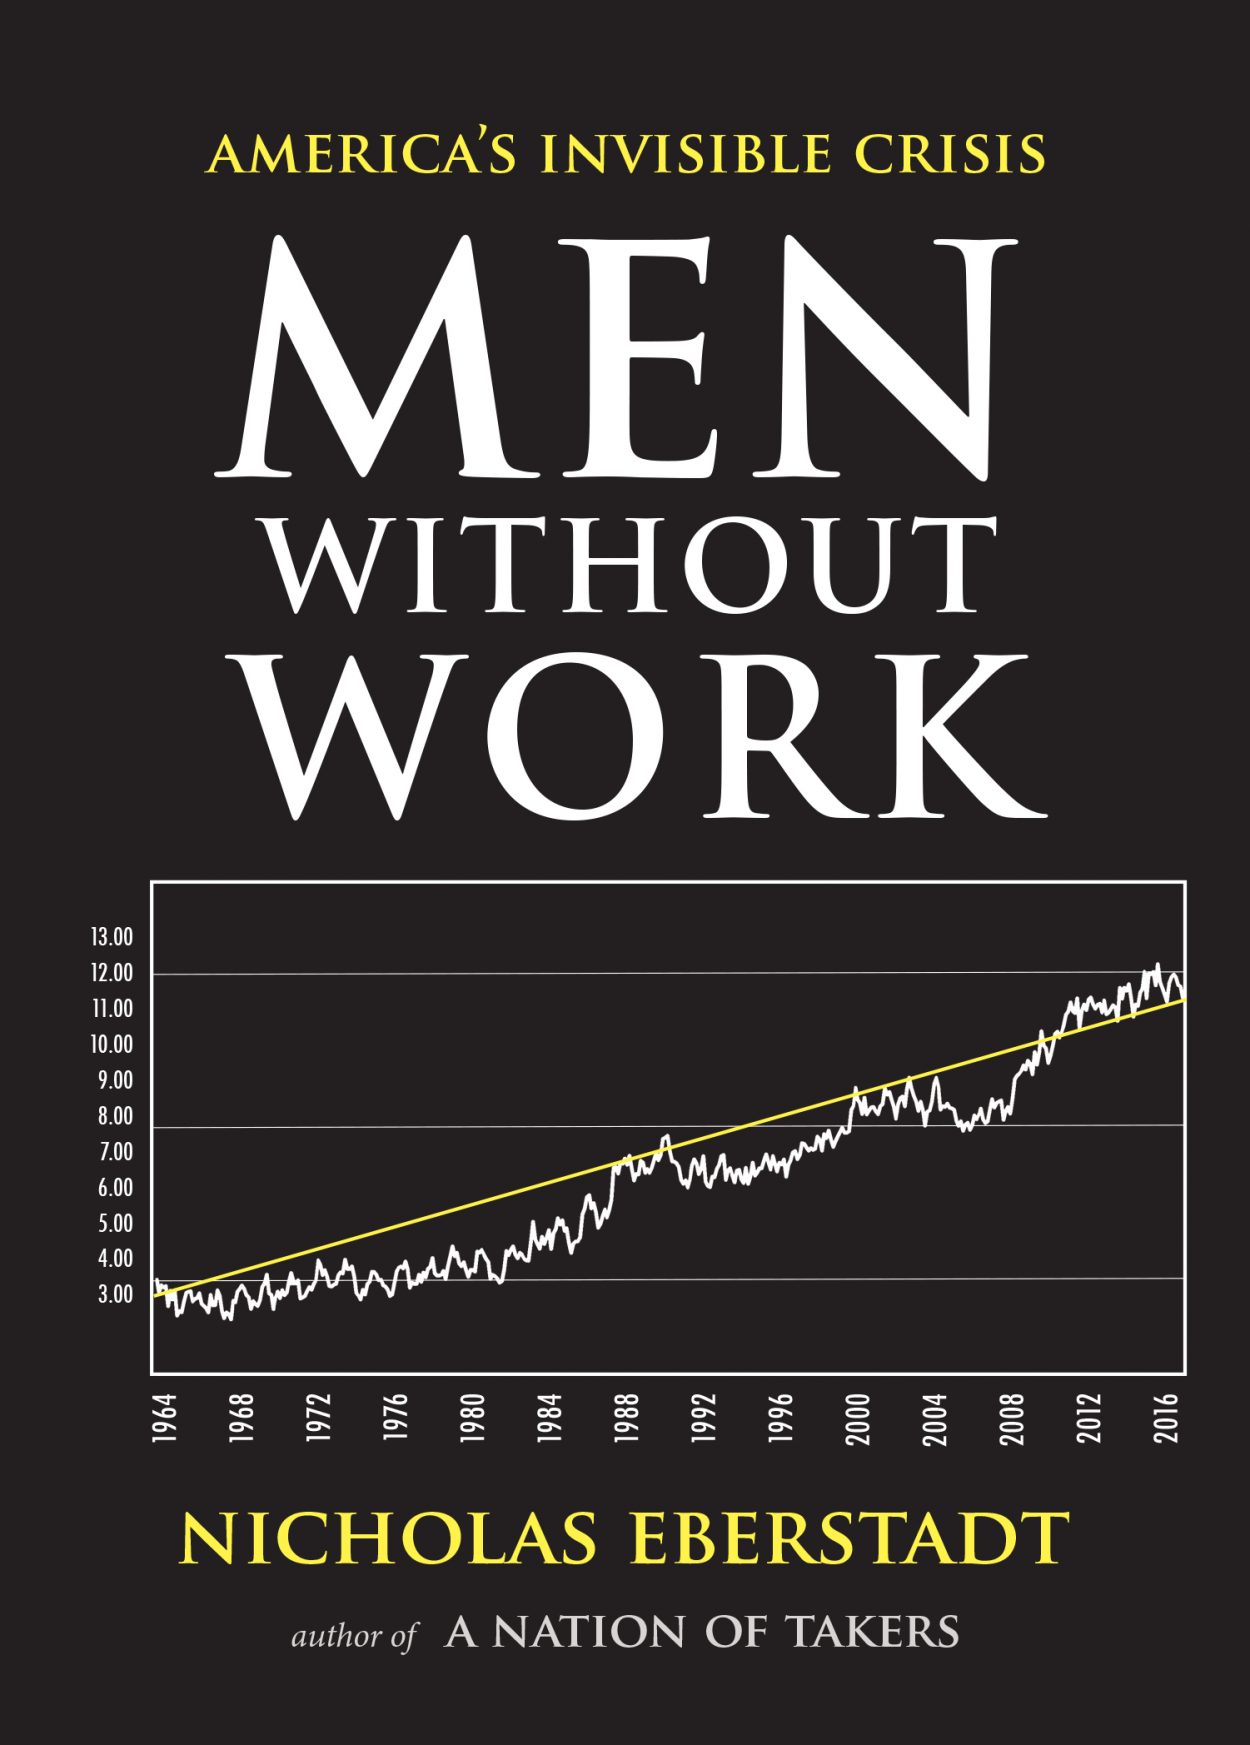 Why Are Millions of Men Missing from the Workforce? The Art of Manliness